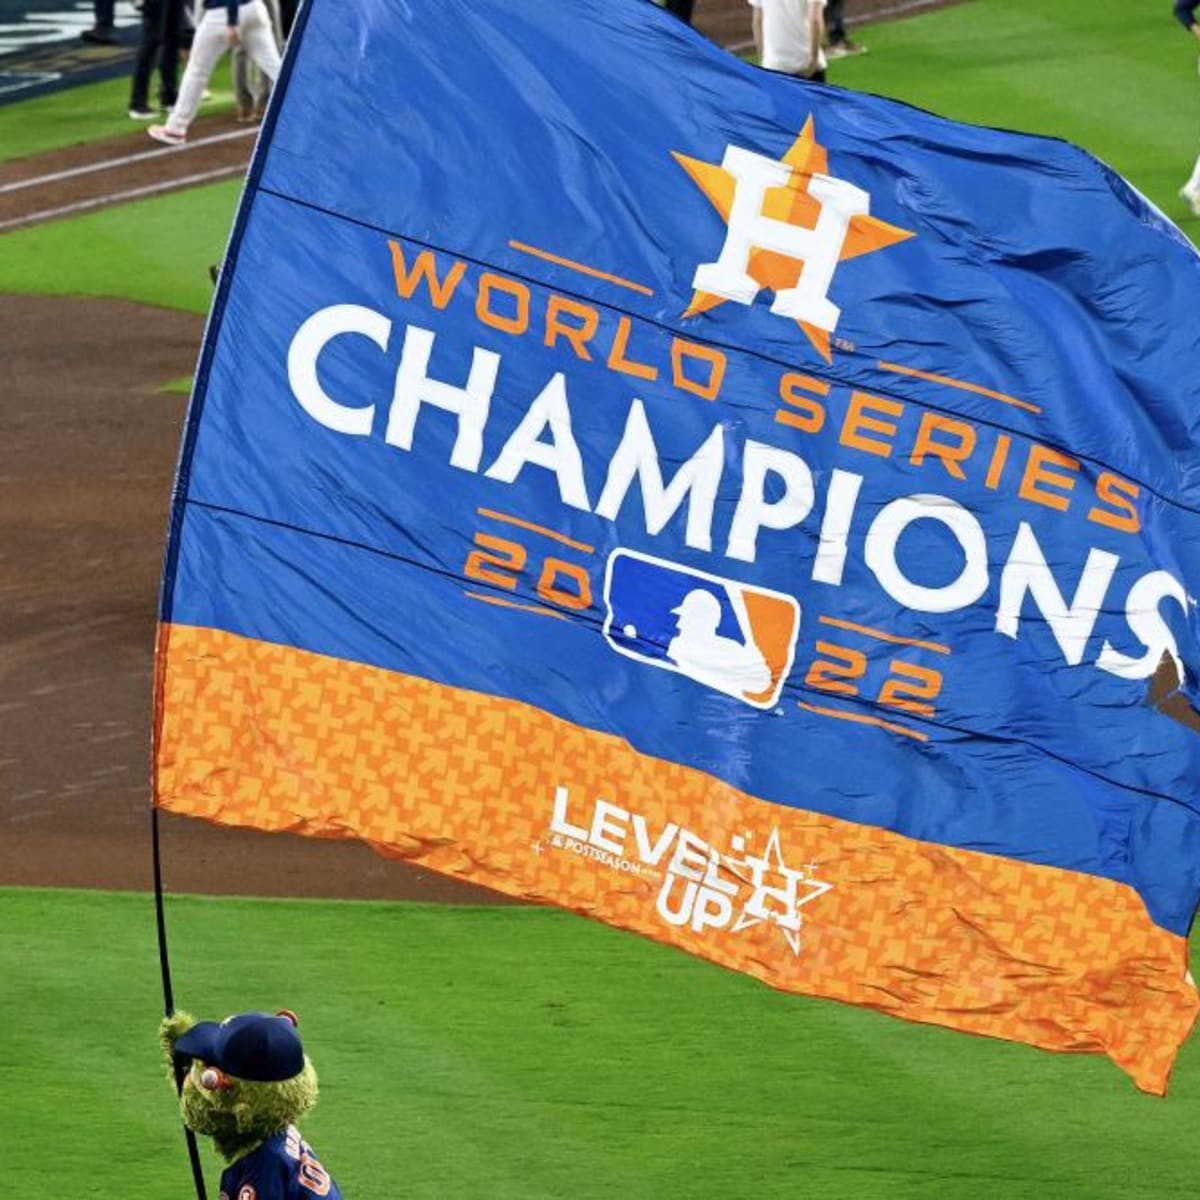 FOX Sports: MLB on X: THE HOUSTON ASTROS ARE AL WEST CHAMPIONS YET AGAIN  👑🚀  / X